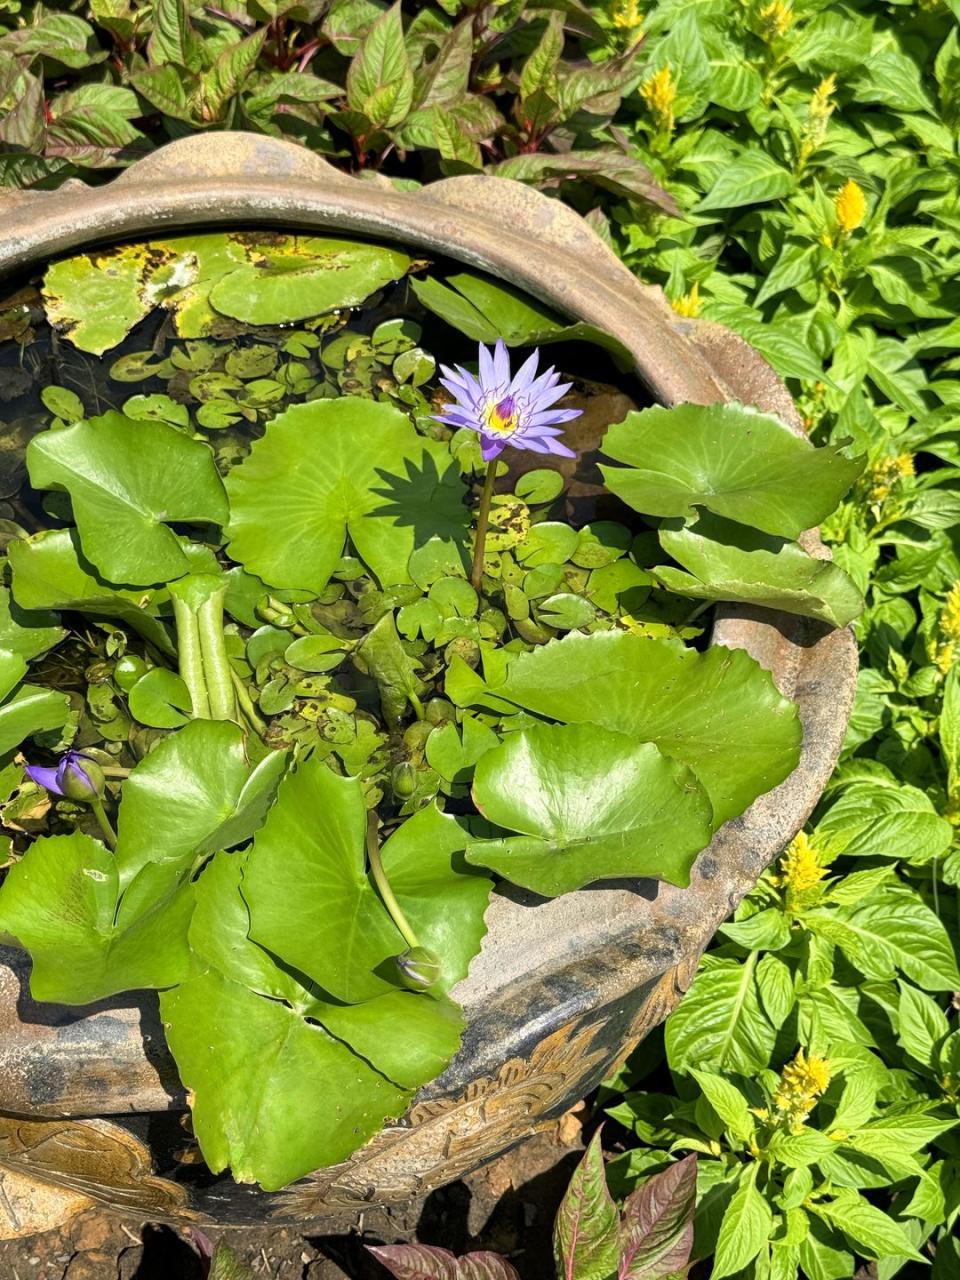 purple water lily flower, fully opened in the sunshine growing in a shallow flower pot pond, surrounded by green lily pad leaves within an ornamental water garden feature